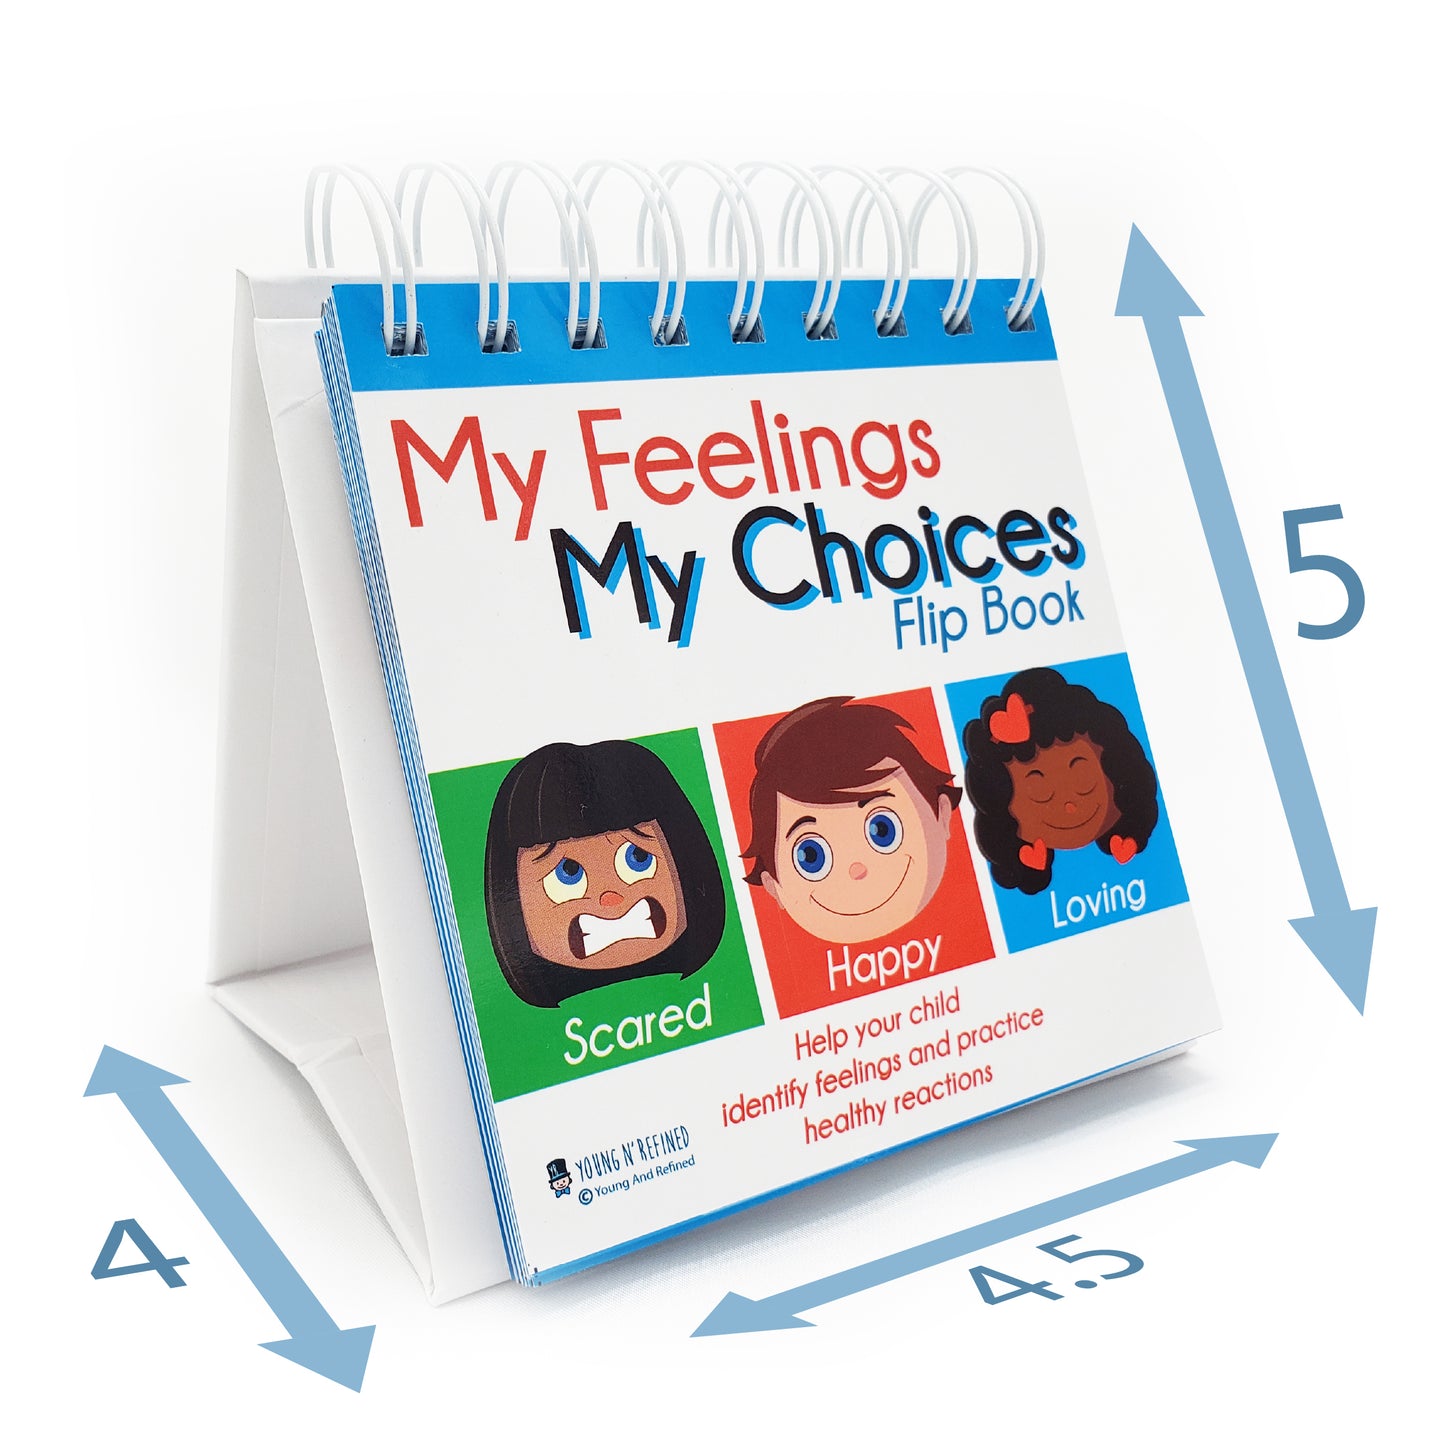 My Feelings My Choices Flip Book Tool for teaching processing 22 different emotions for children (5x6.5) Young N Refined